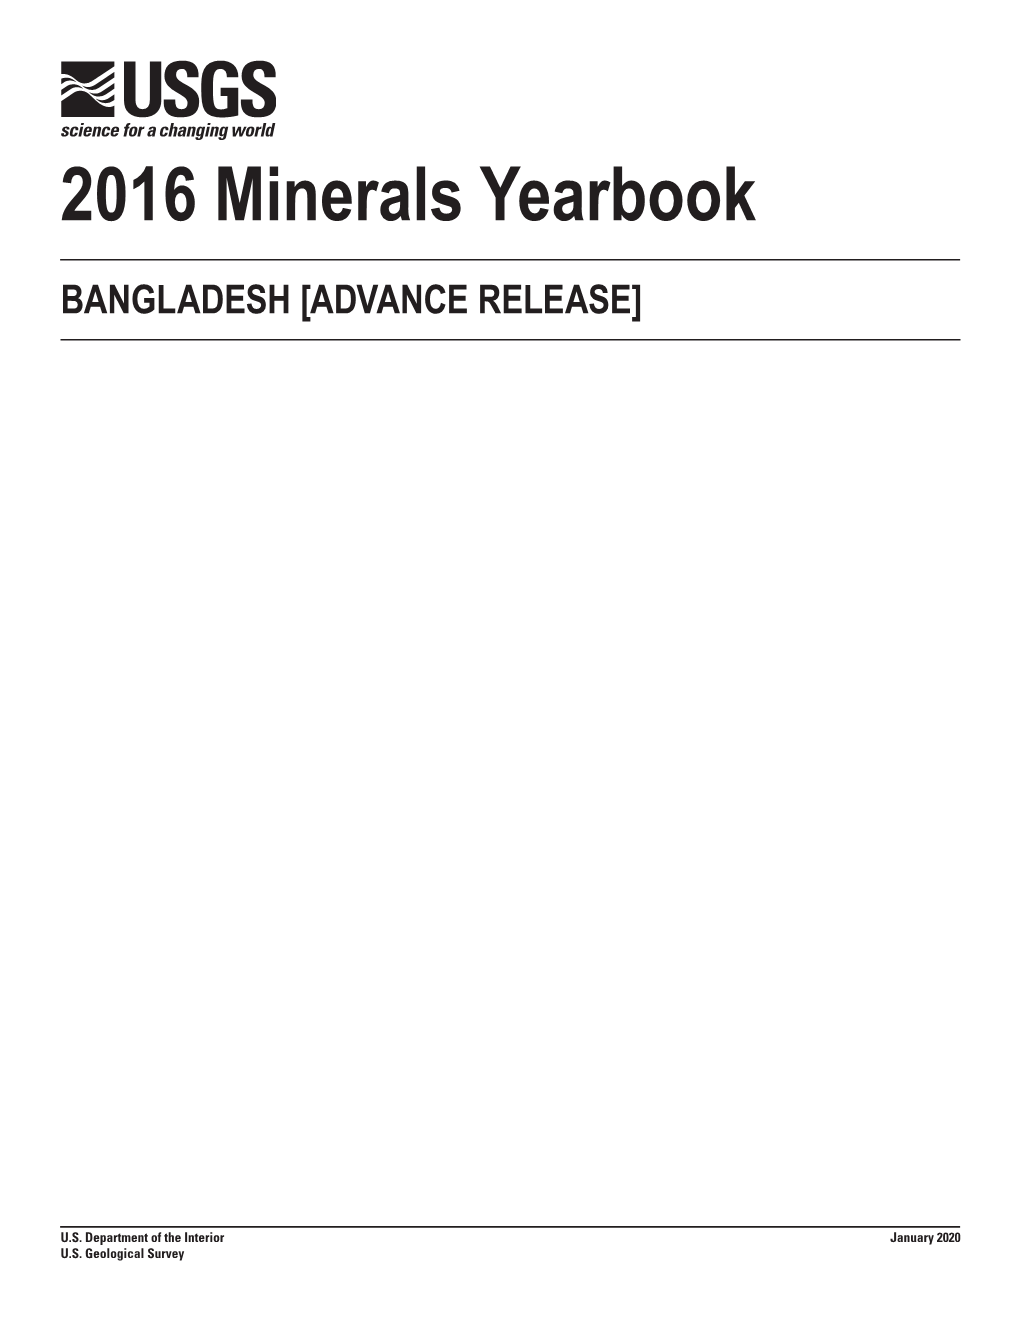 The Mineral Industry of Bangladesh in 2016